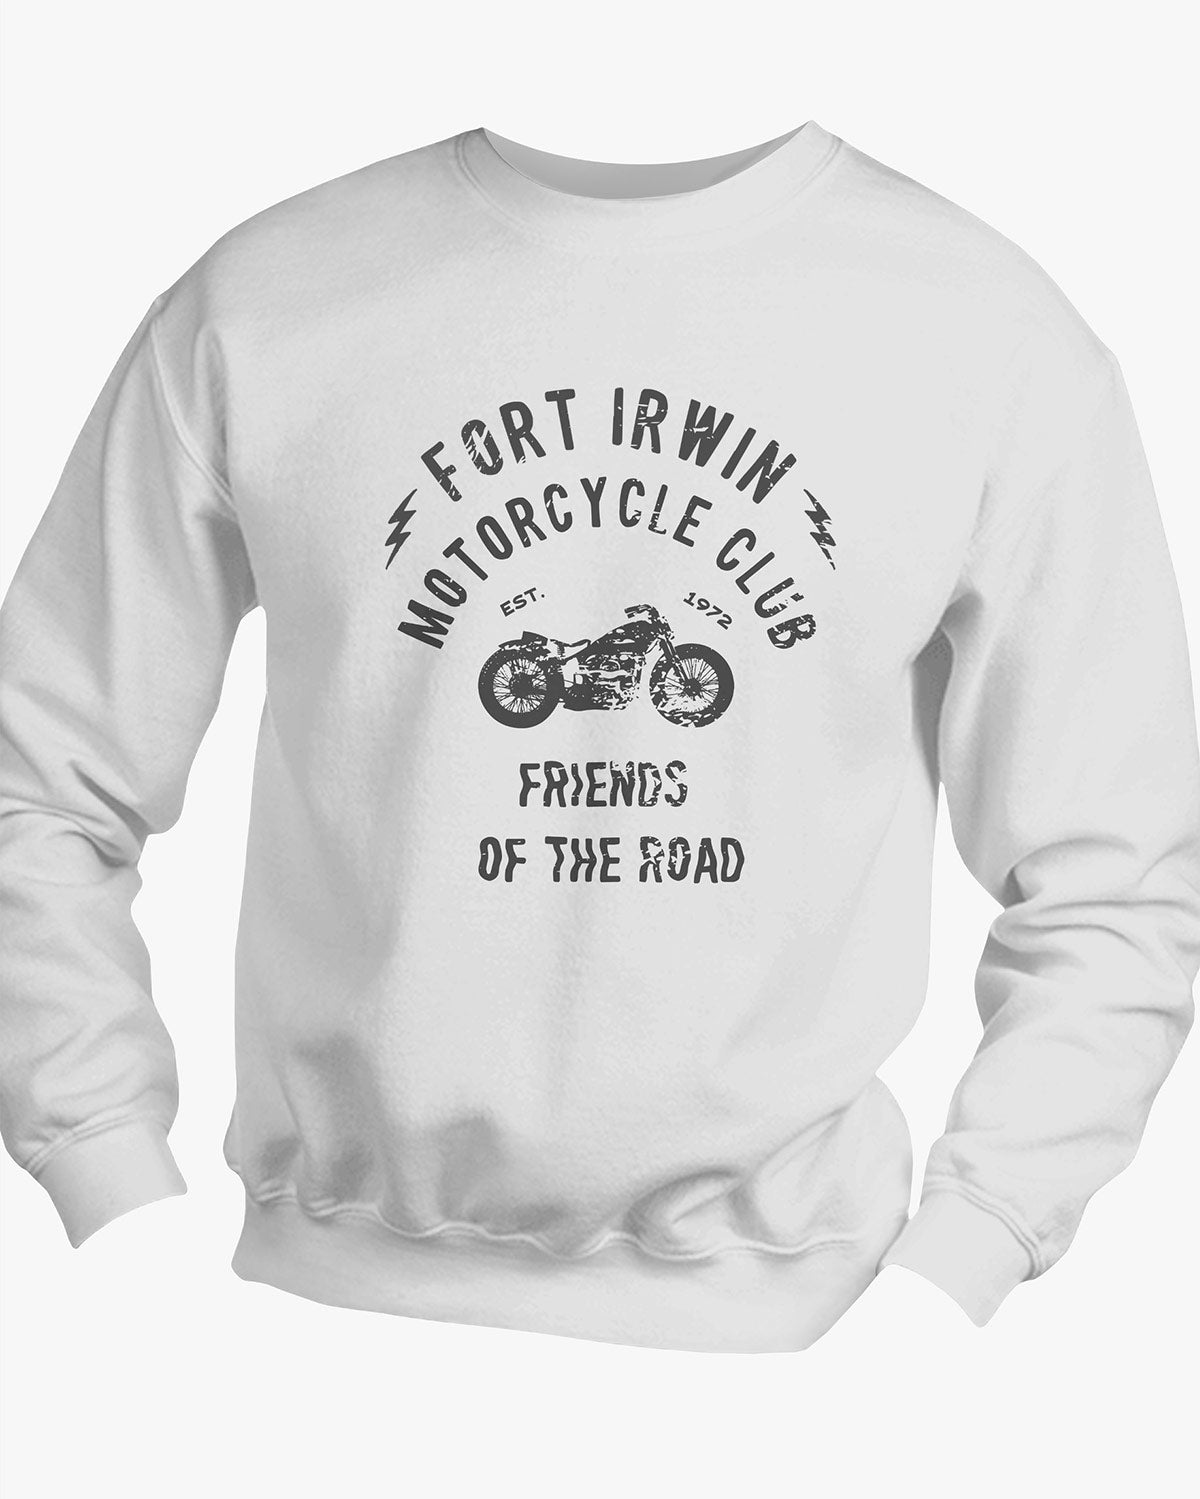 Motorcycle Club - Fort Irwin - Sweater